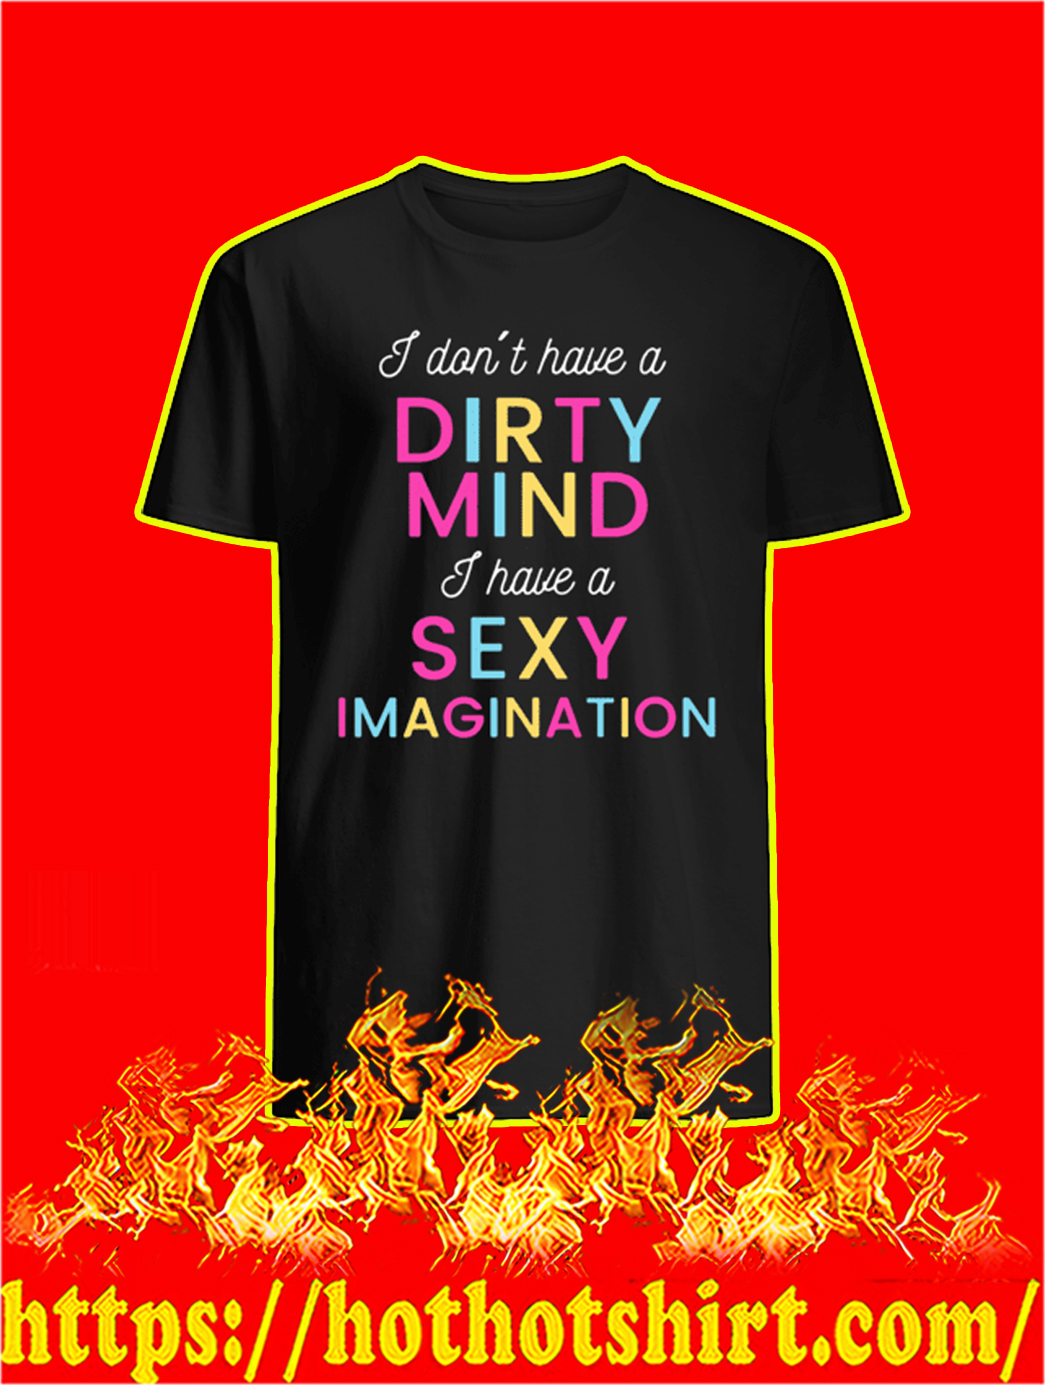 I Don’t Have A Dirty Mind I Have A Sexy Imagination shirt, tank top and hoodie